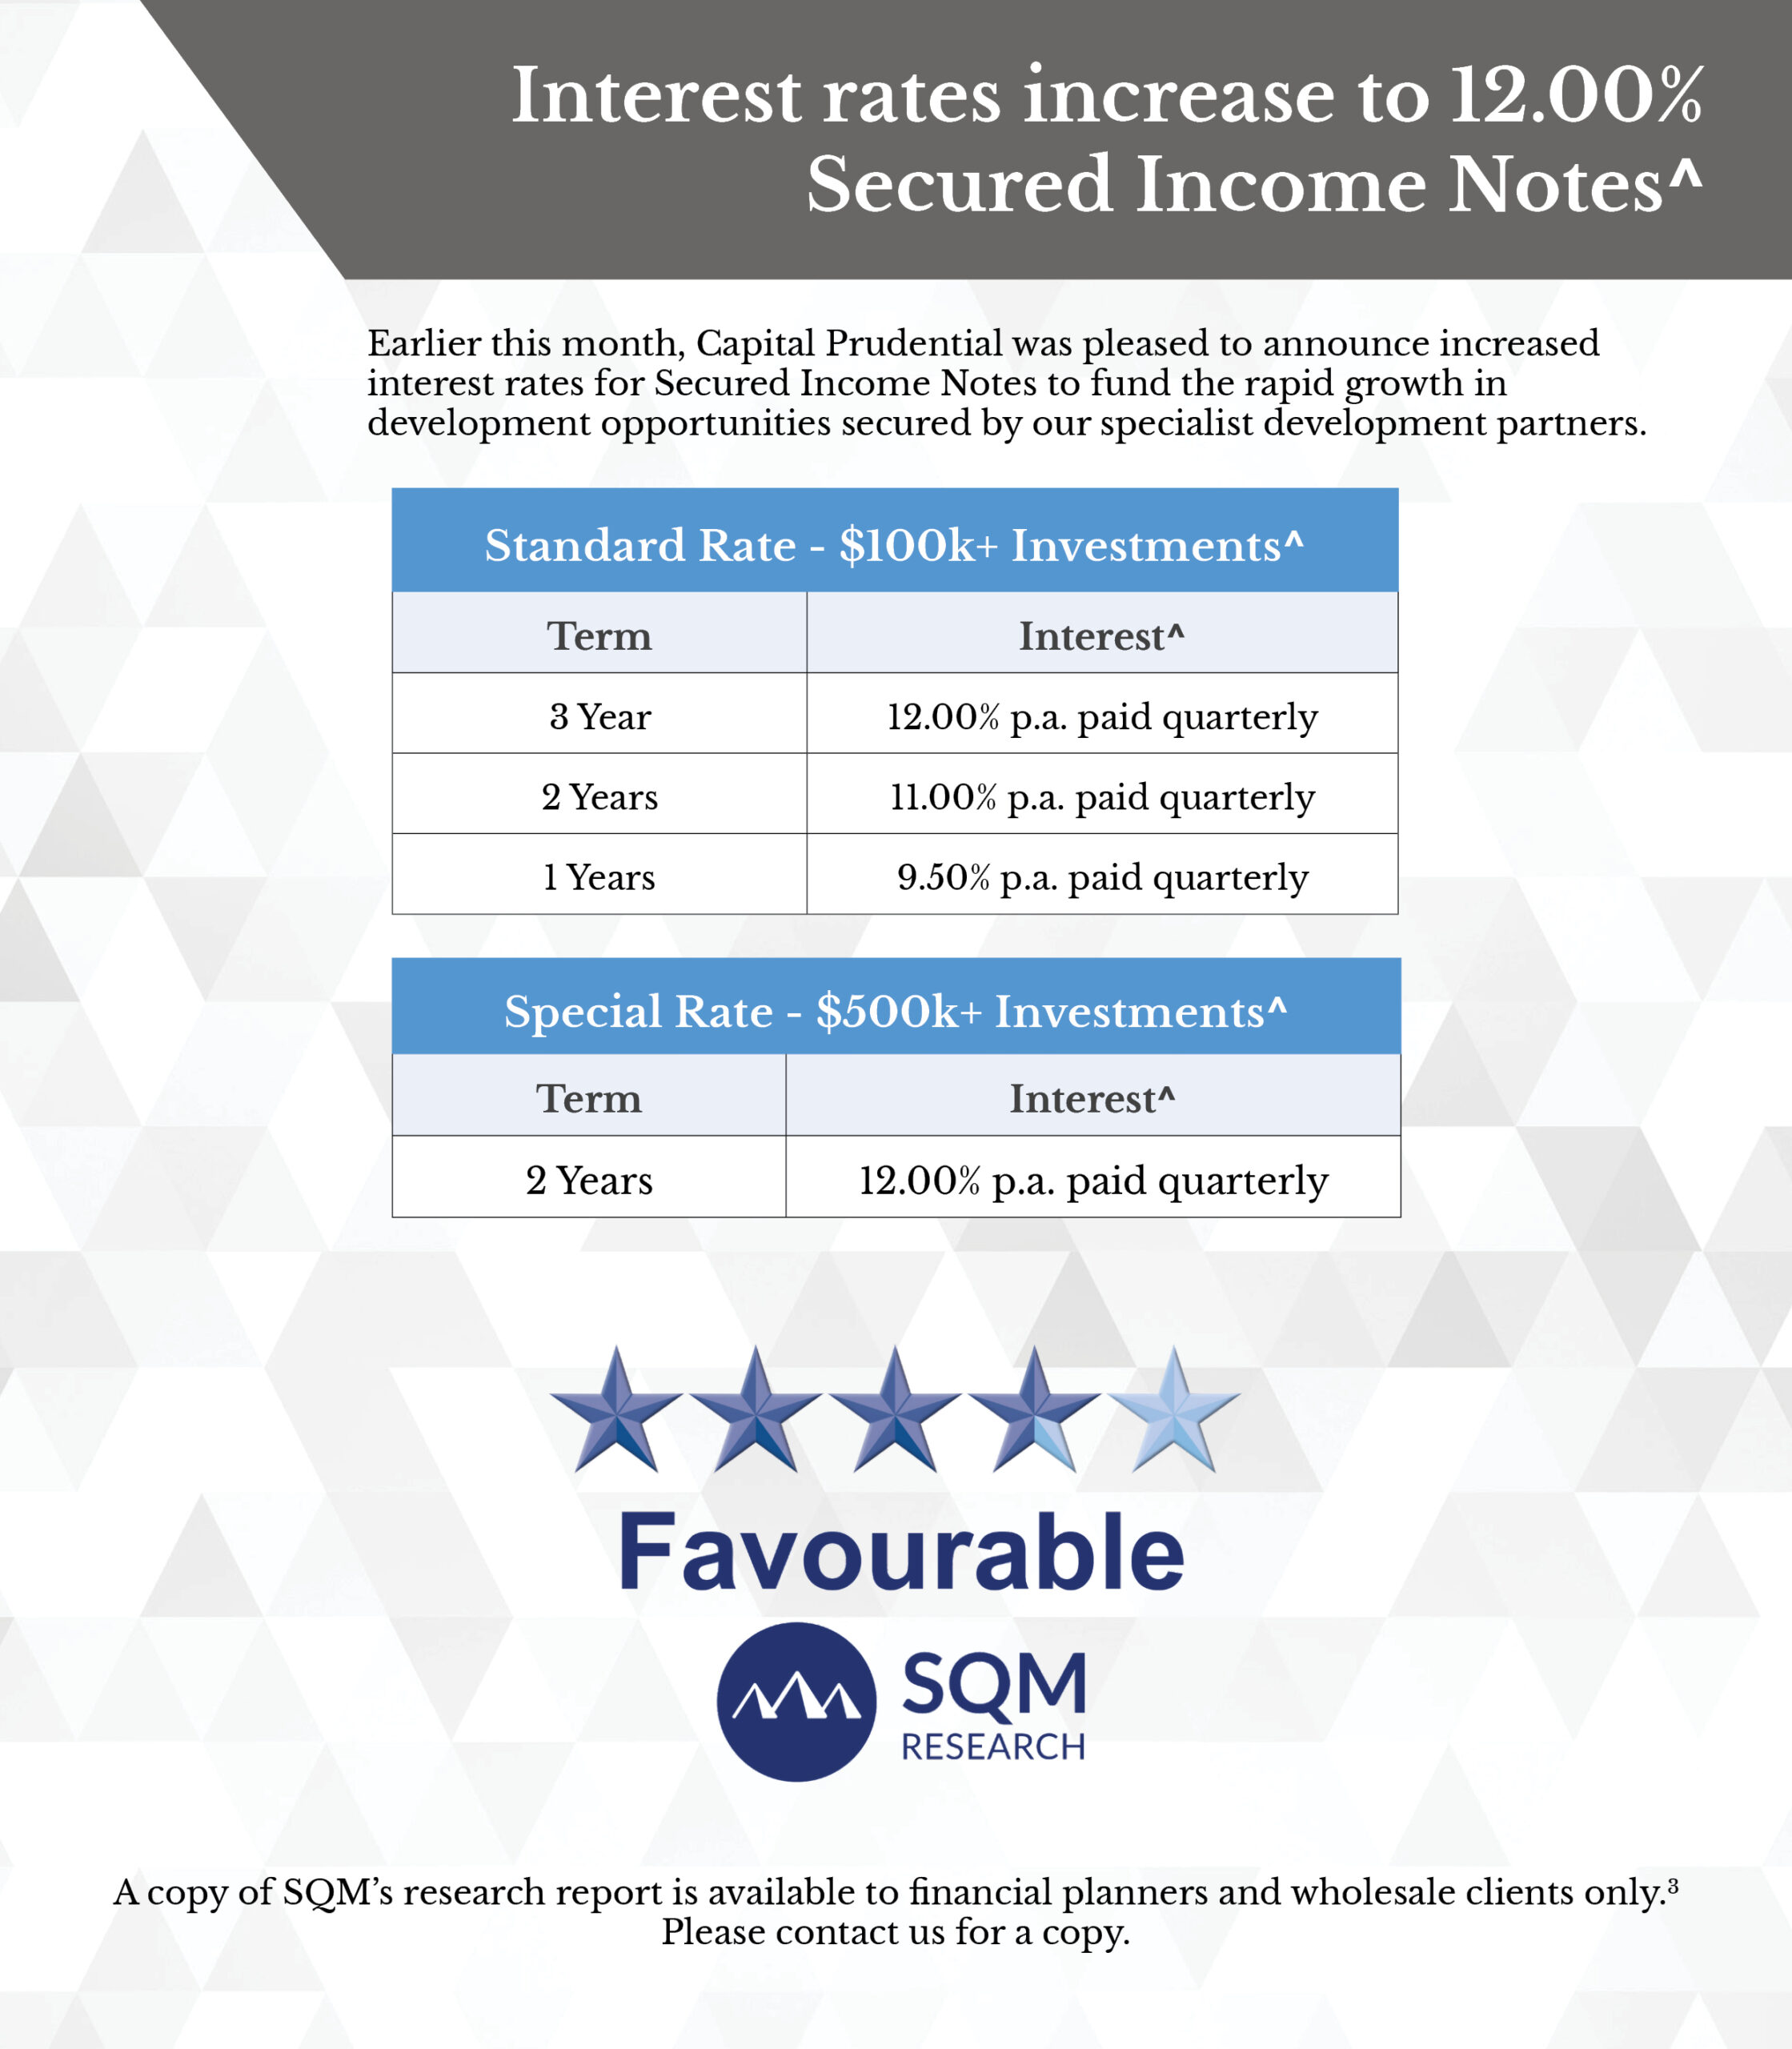 Interest rates increase to 12.00% Secured Income Notes^